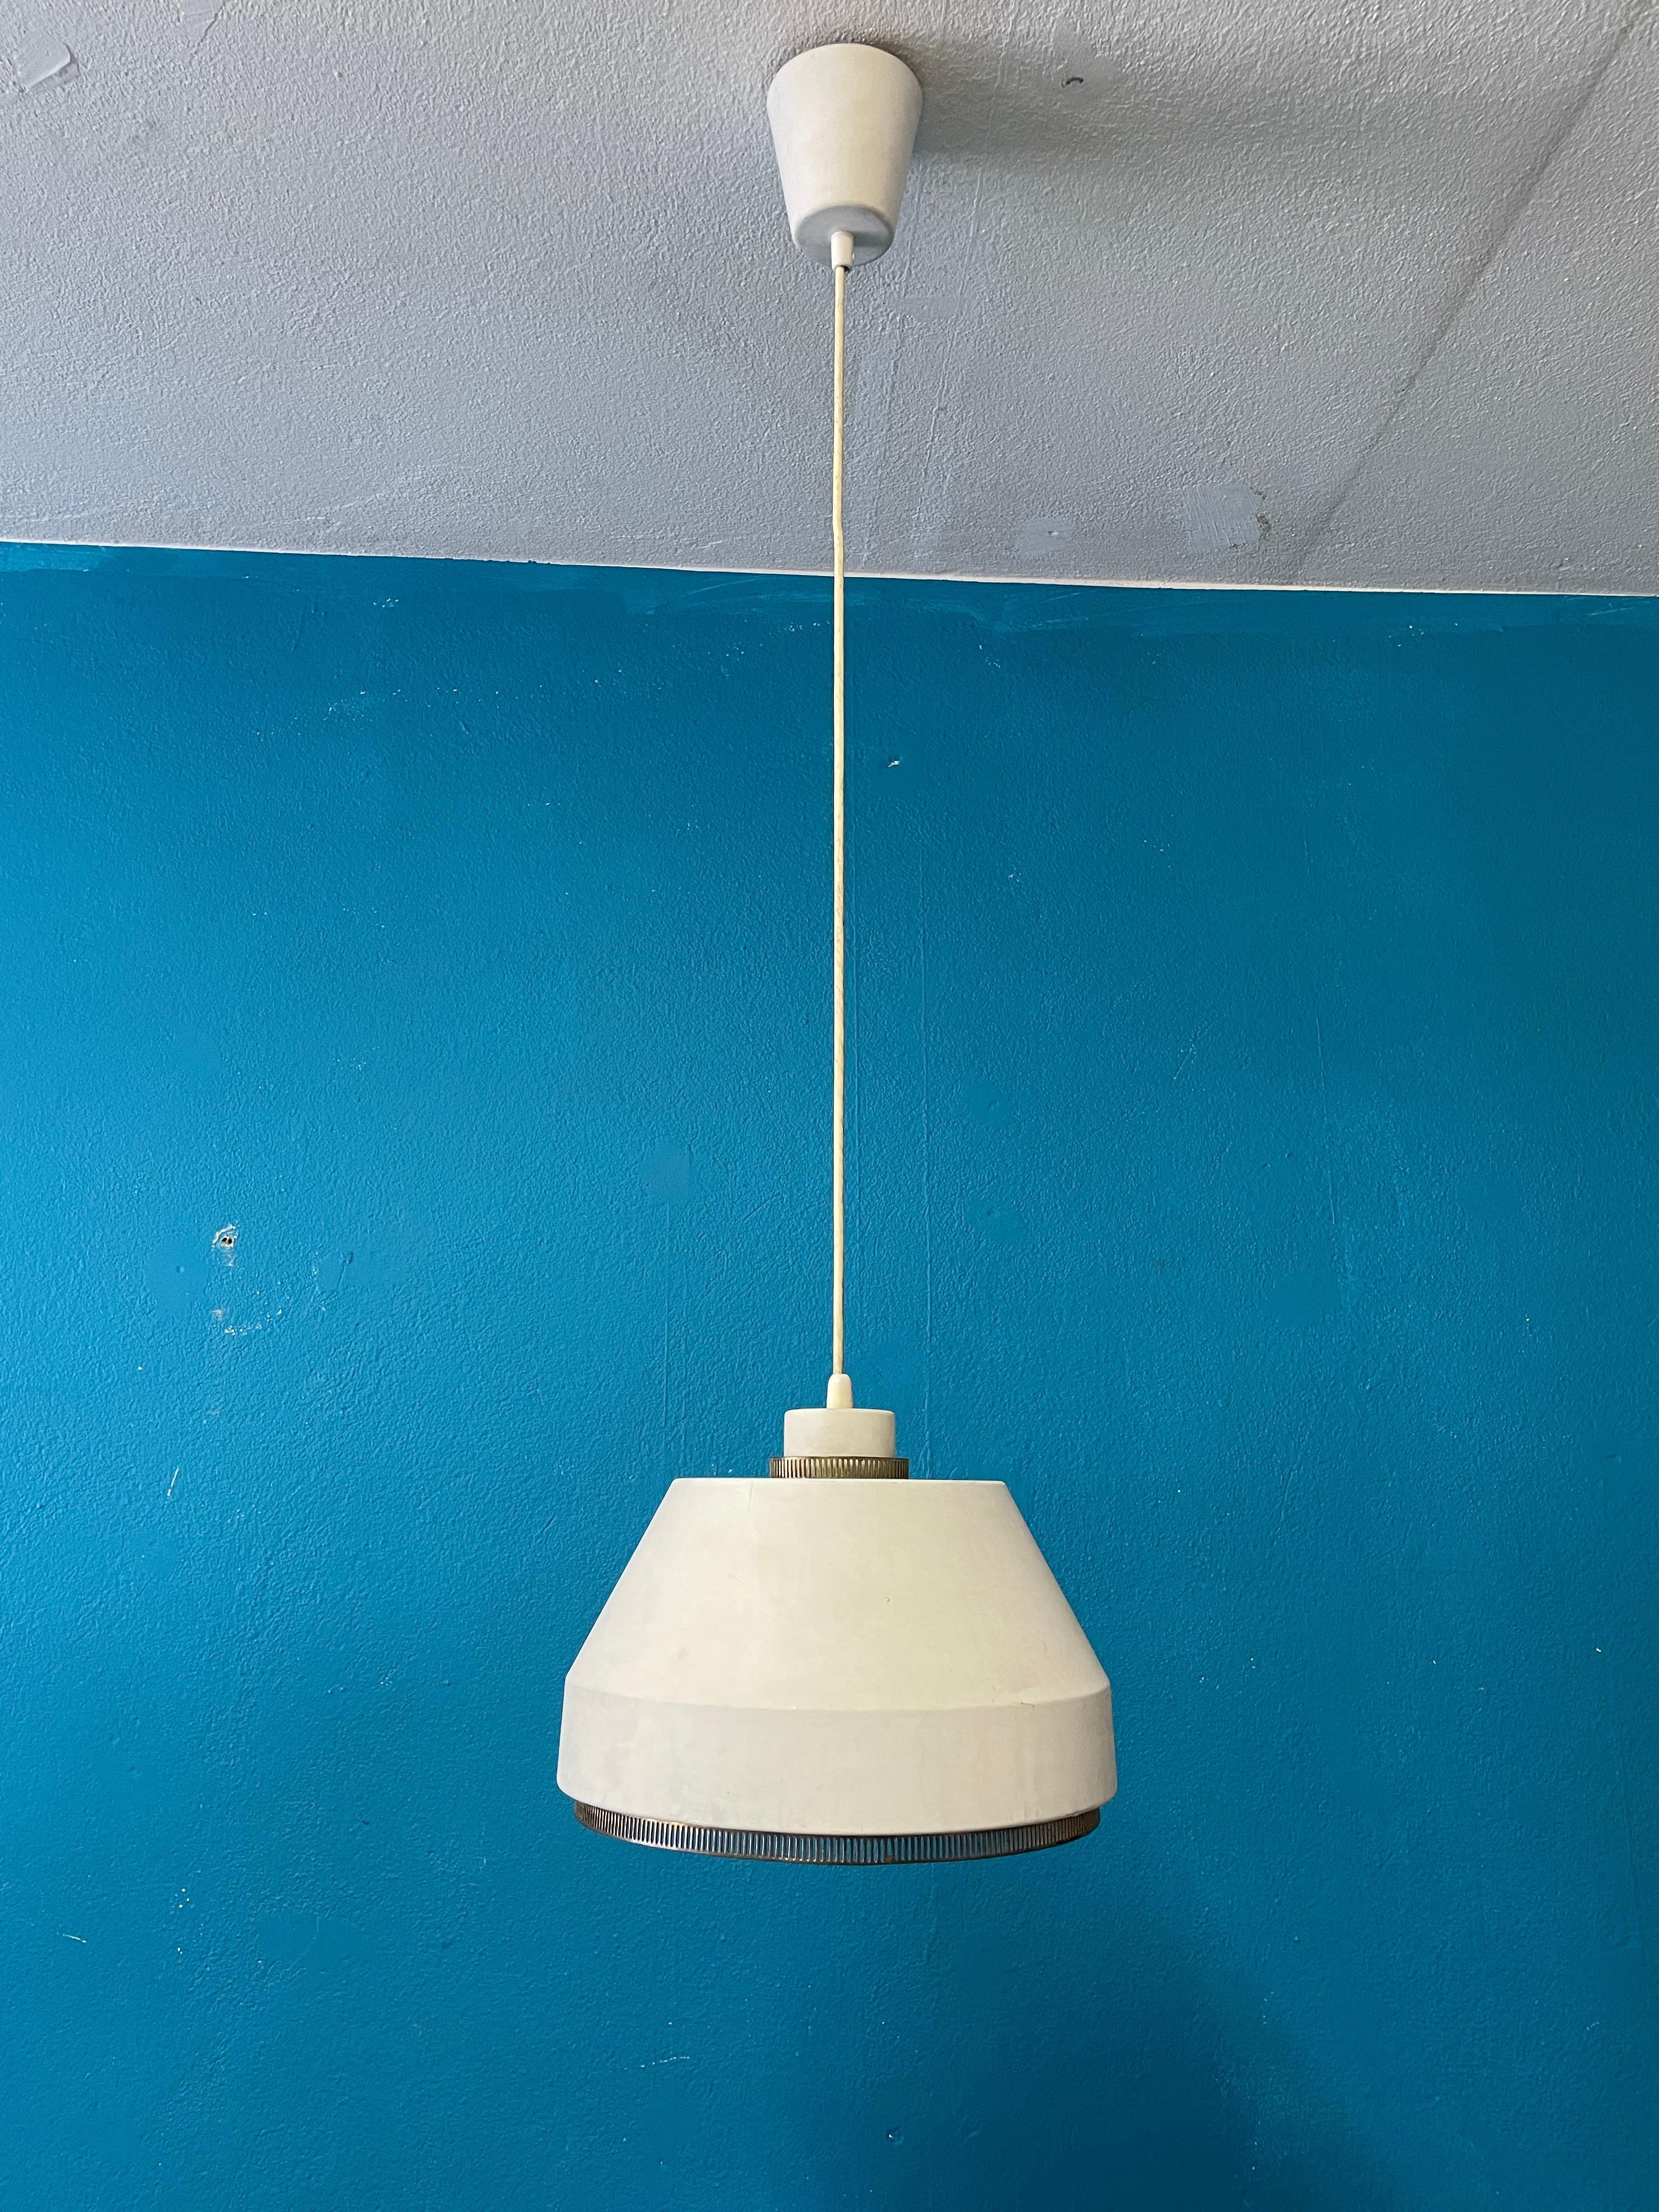 Vintage Artek’s AMA 500 pendant, designed by Aino Aalto, is a stunning classic from 1950s. Aino Aalto designed the AMA 500 pendant originally for Villa Mairea in 1941, a building she designed in collaboration with her husband Alvar Aalto.

This lamp